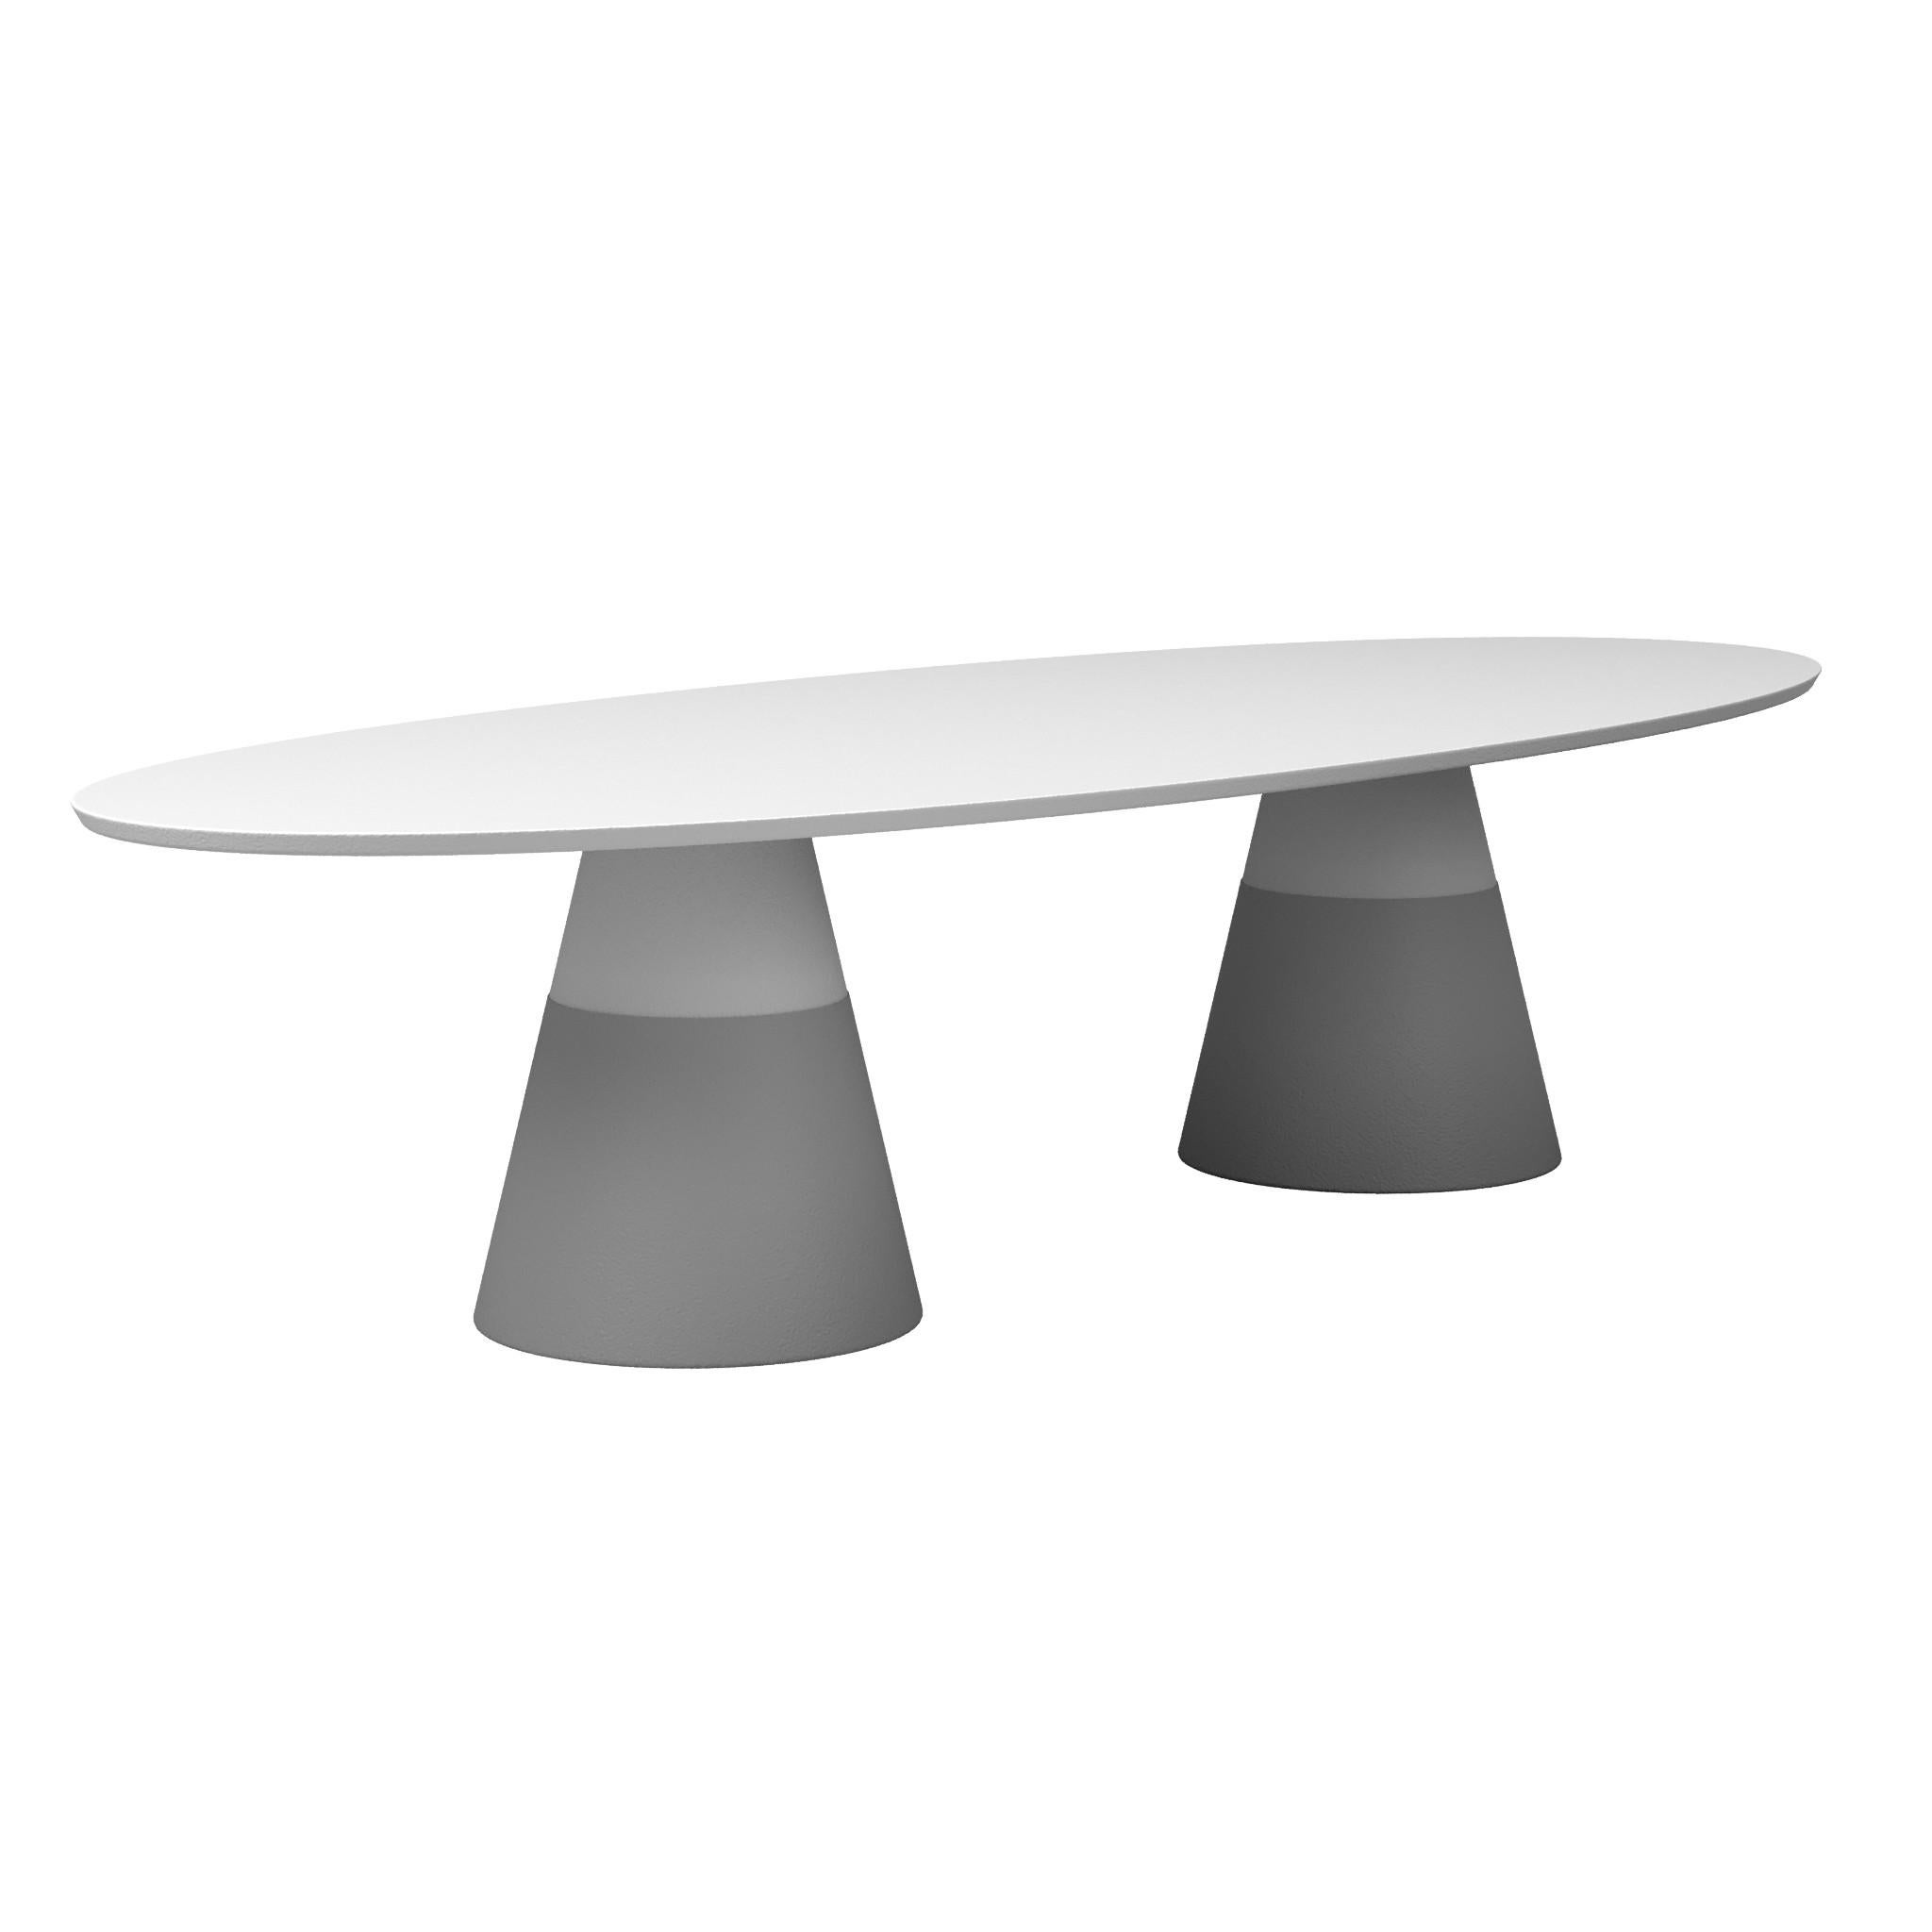 Contemporary outdoor dining table crafted of fiber reinforced resin. This highly resistant material is very durable and requires less maintenance than concrete. The table top is lacquered in matte white while the conical bases are accentuated with